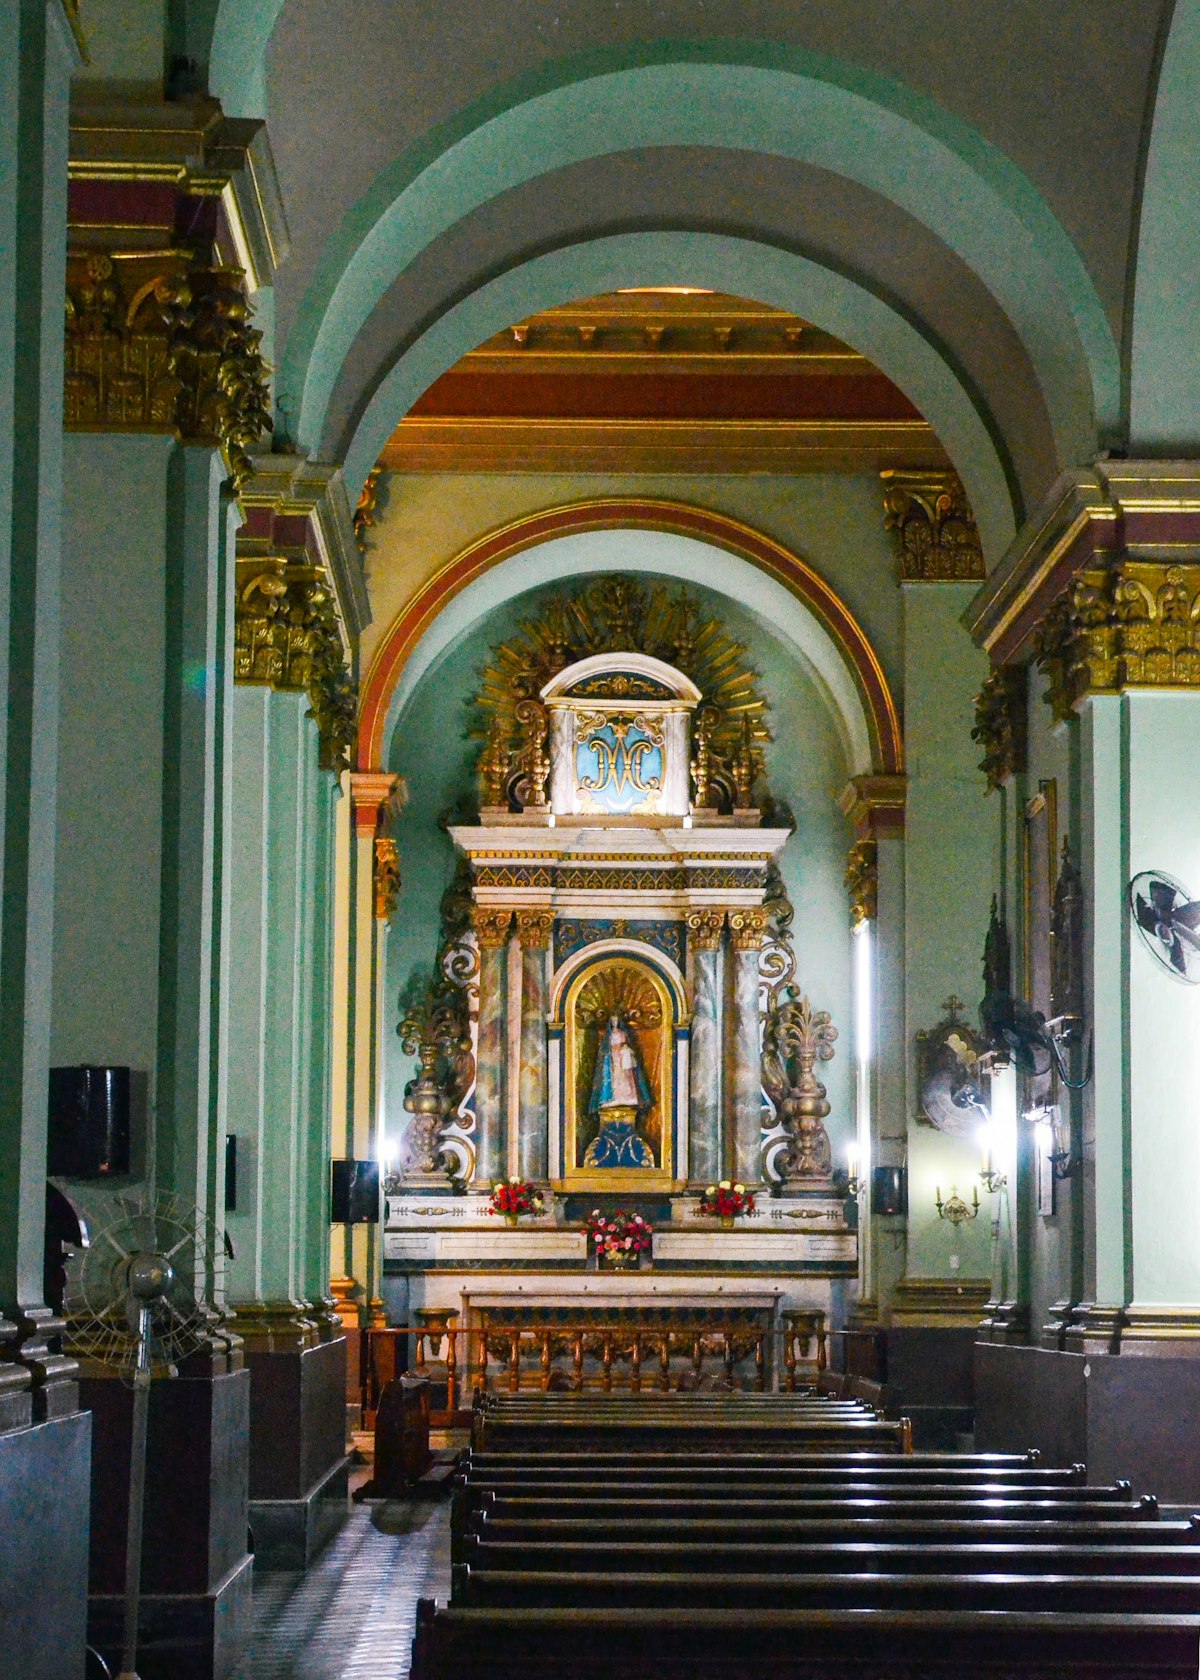 Inside the Basílica of Nuestra Señora del Valle (Our Lady of the Valley) Cathedral.